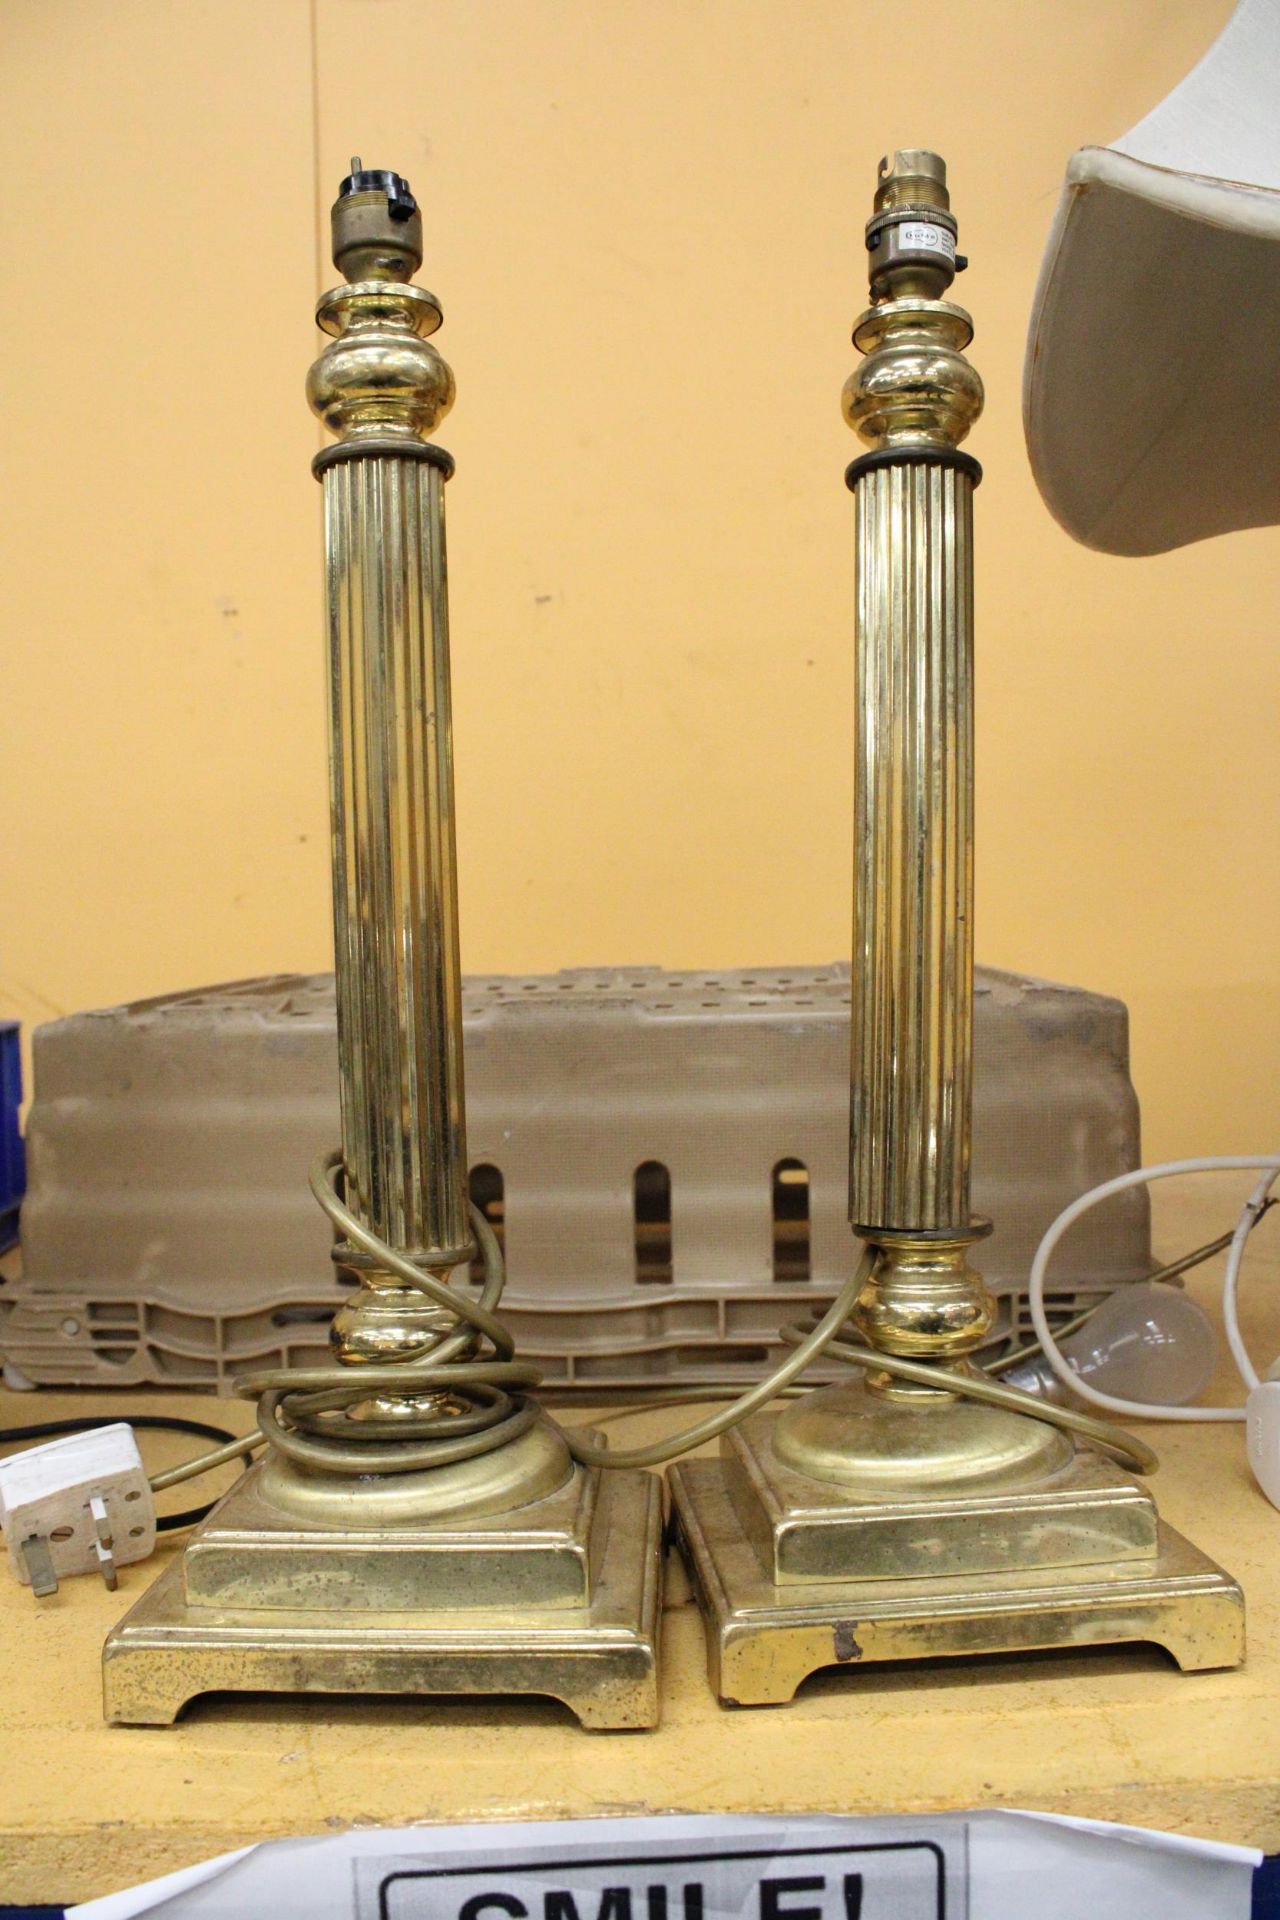 A PAIR OF HEAVY BRASS PEDESTAL ELECTRIC CANDLE STICKS LAMPS - APPROXIMATELY 47CM HIGH